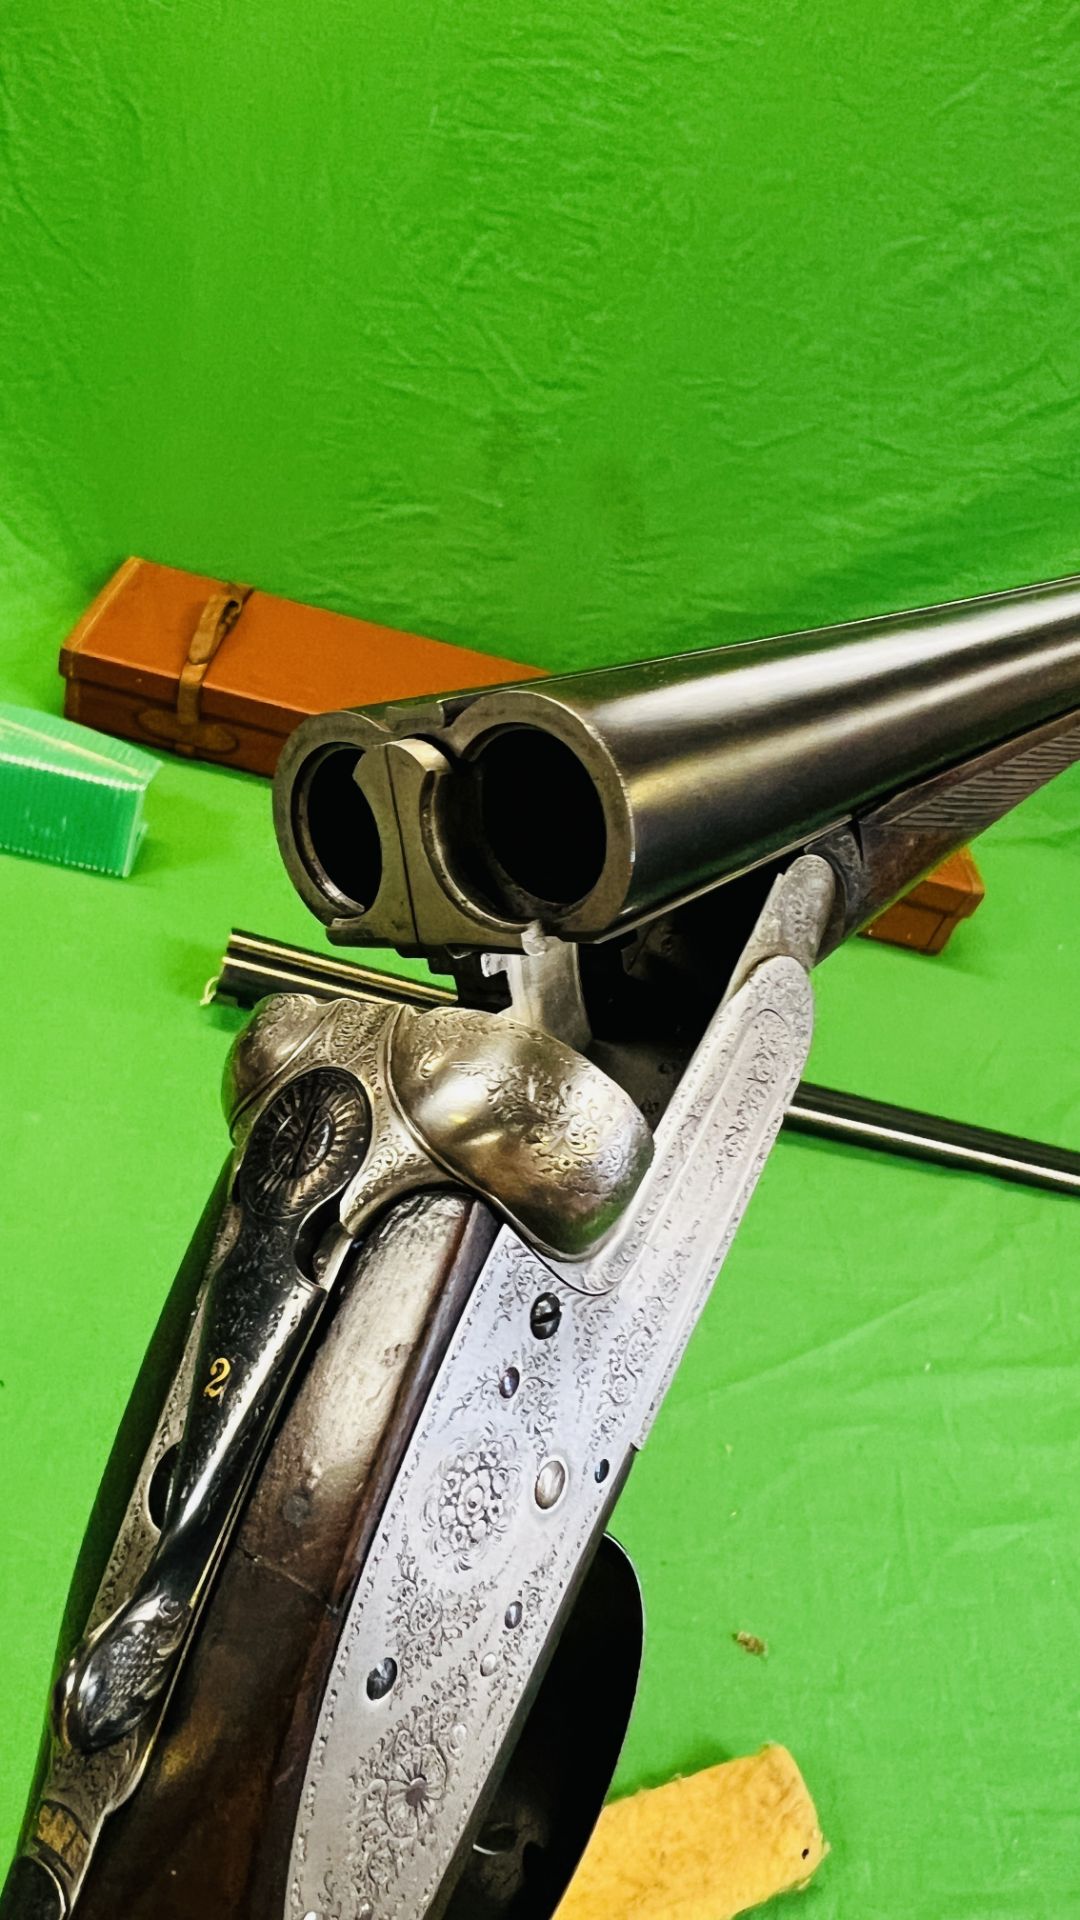 12 BORE TOLLEY SIDE BY SIDE SHOTGUN #8670, 28" BARRELS (2 3/4" CHAMBER), EJECTOR, - Image 25 of 37